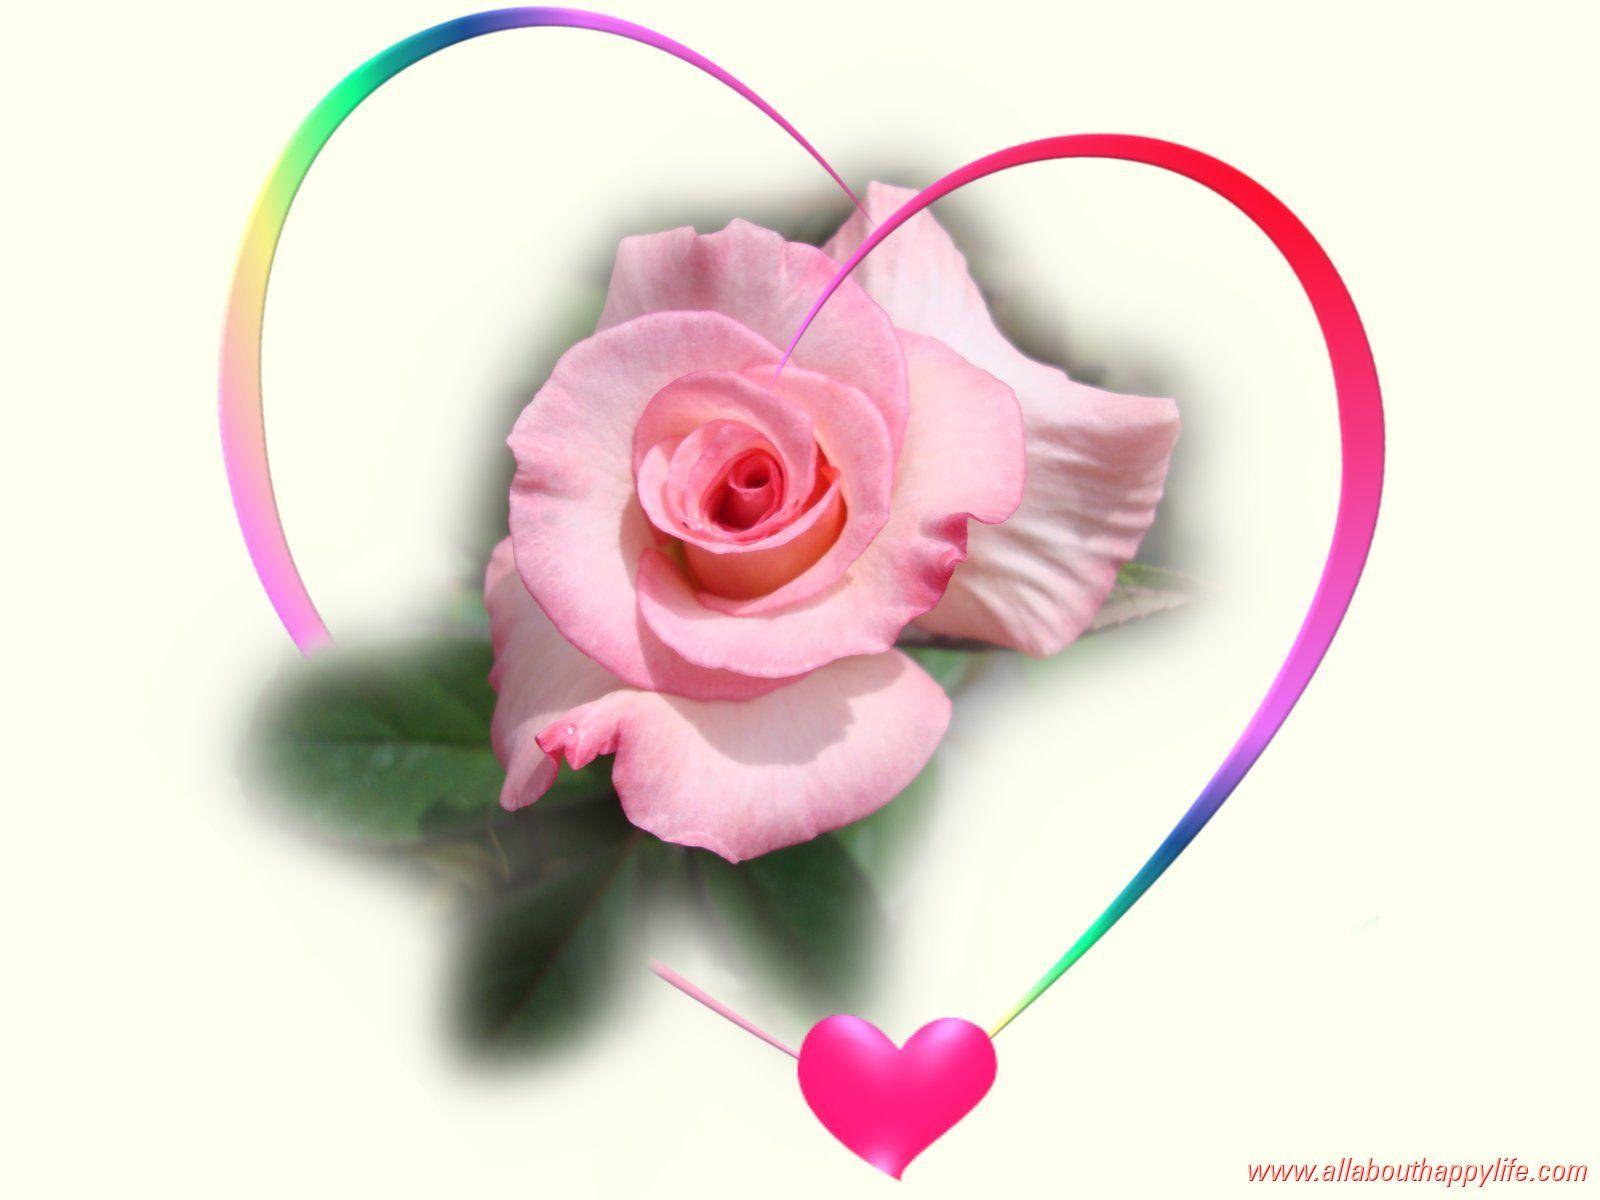 Free Rose And Love Image HD Widescreen Of Computer